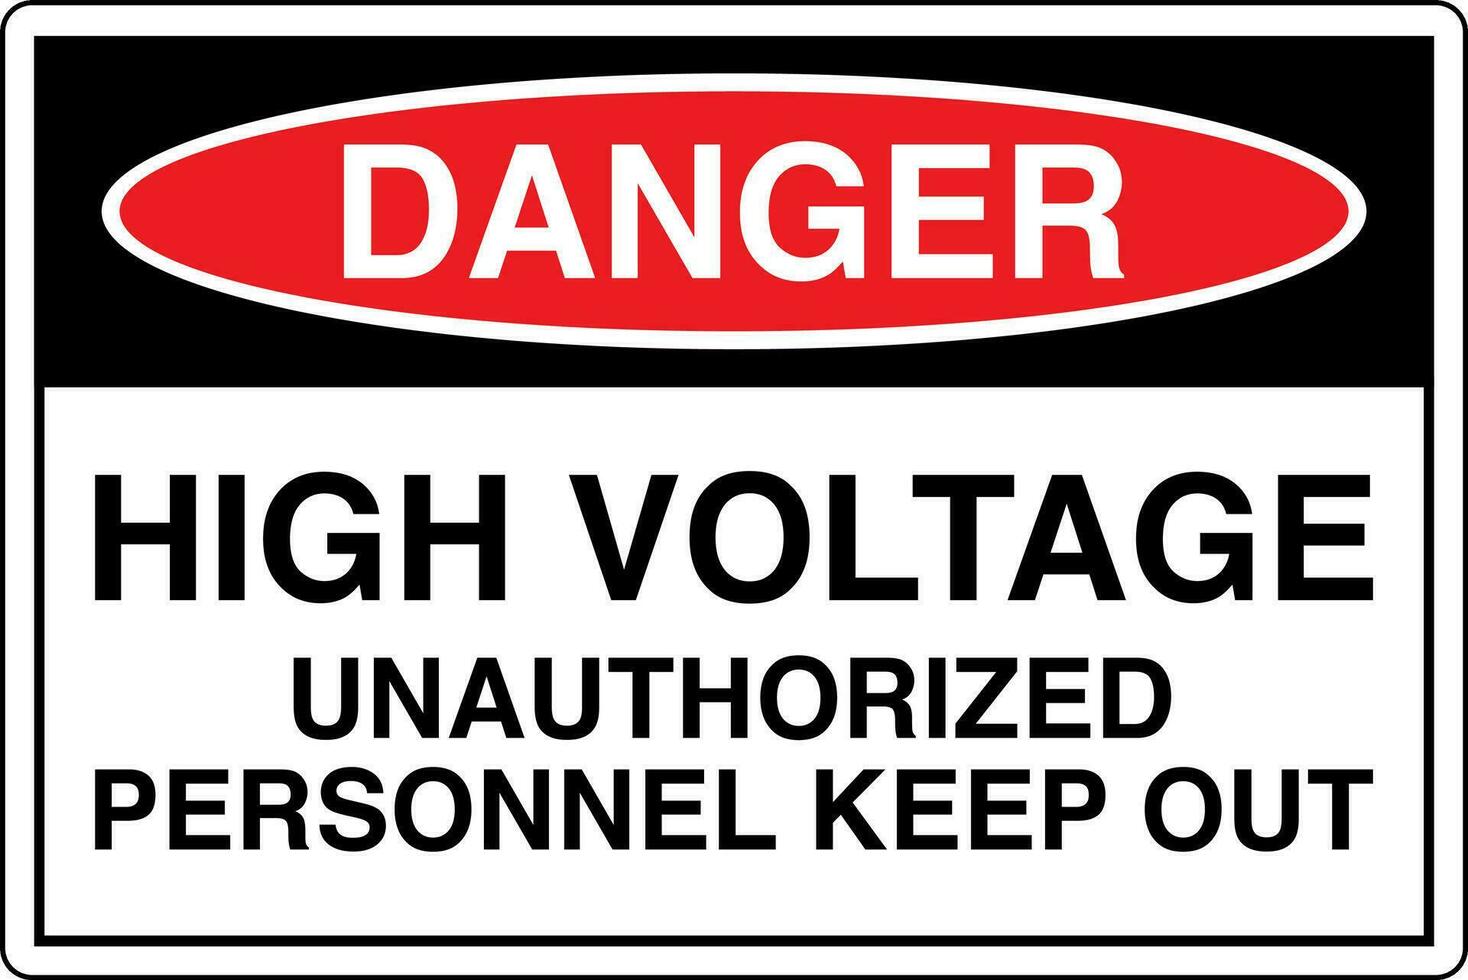 OSHA standards symbols registered workplace safety sign danger caution warning HIGH VOLTAGE UNAUTHORIZED PERSONNEL KEEP OUT vector